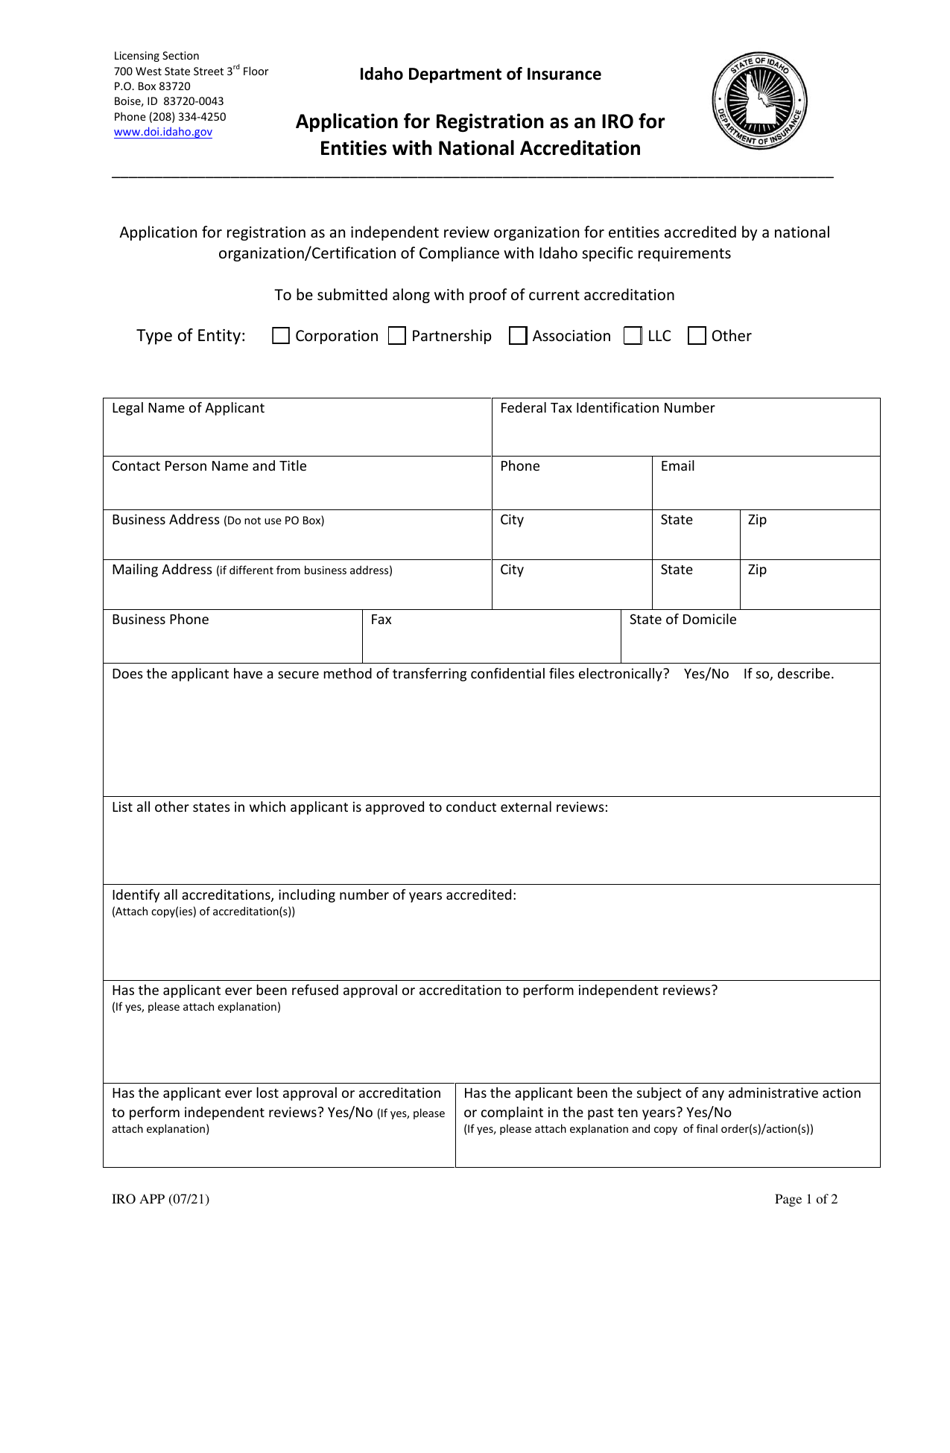 Application for Registration as an Iro for Entities With National Accreditation - Idaho, Page 1